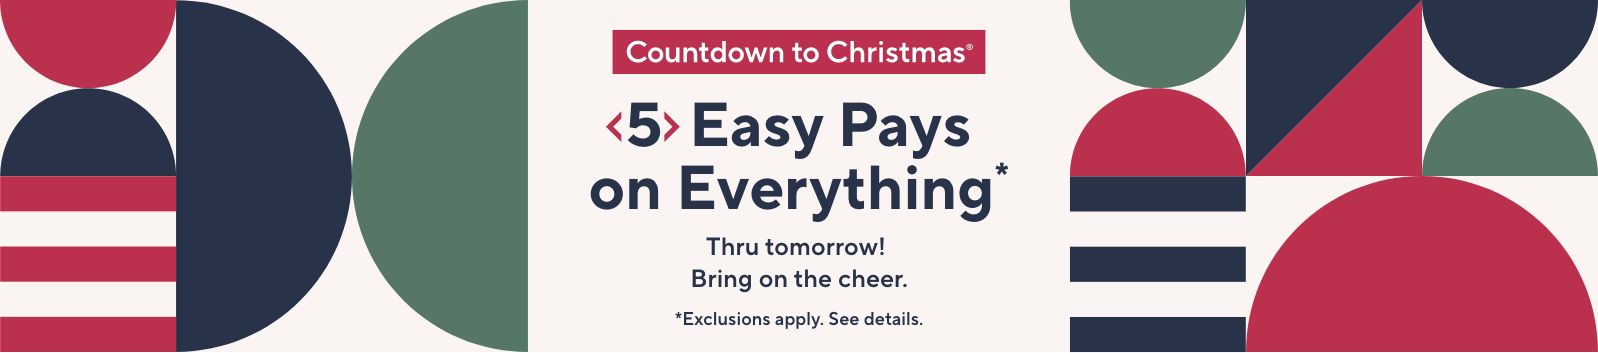 Countdown to Christmas® - 5 Easy Pays on Everything*  Thru tomorrow! Bring on the cheer.  *Exclusions apply. See details. 